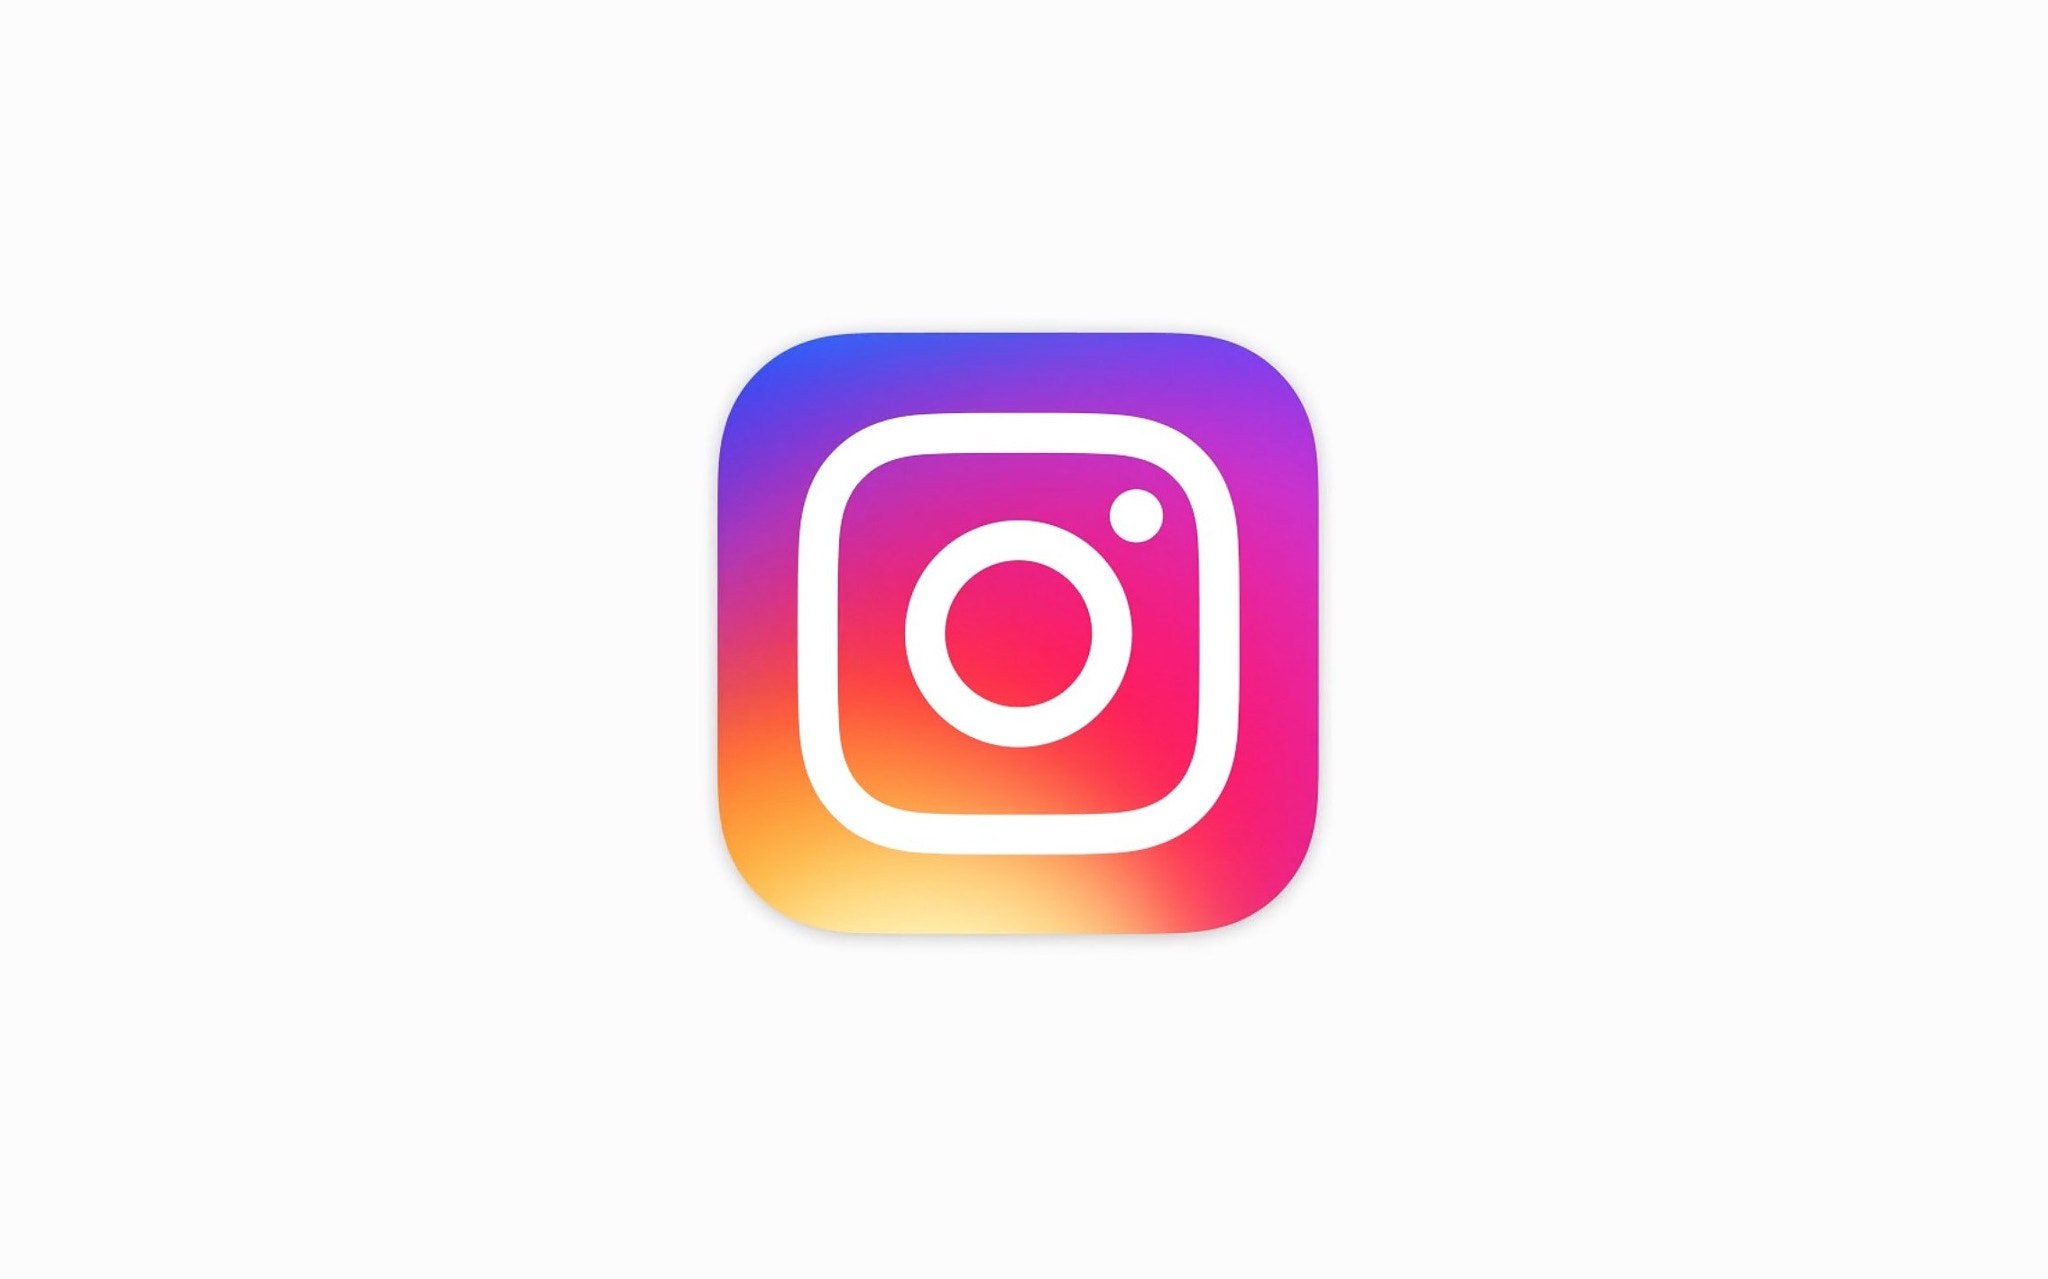 Buy Instagram Followers and Likes